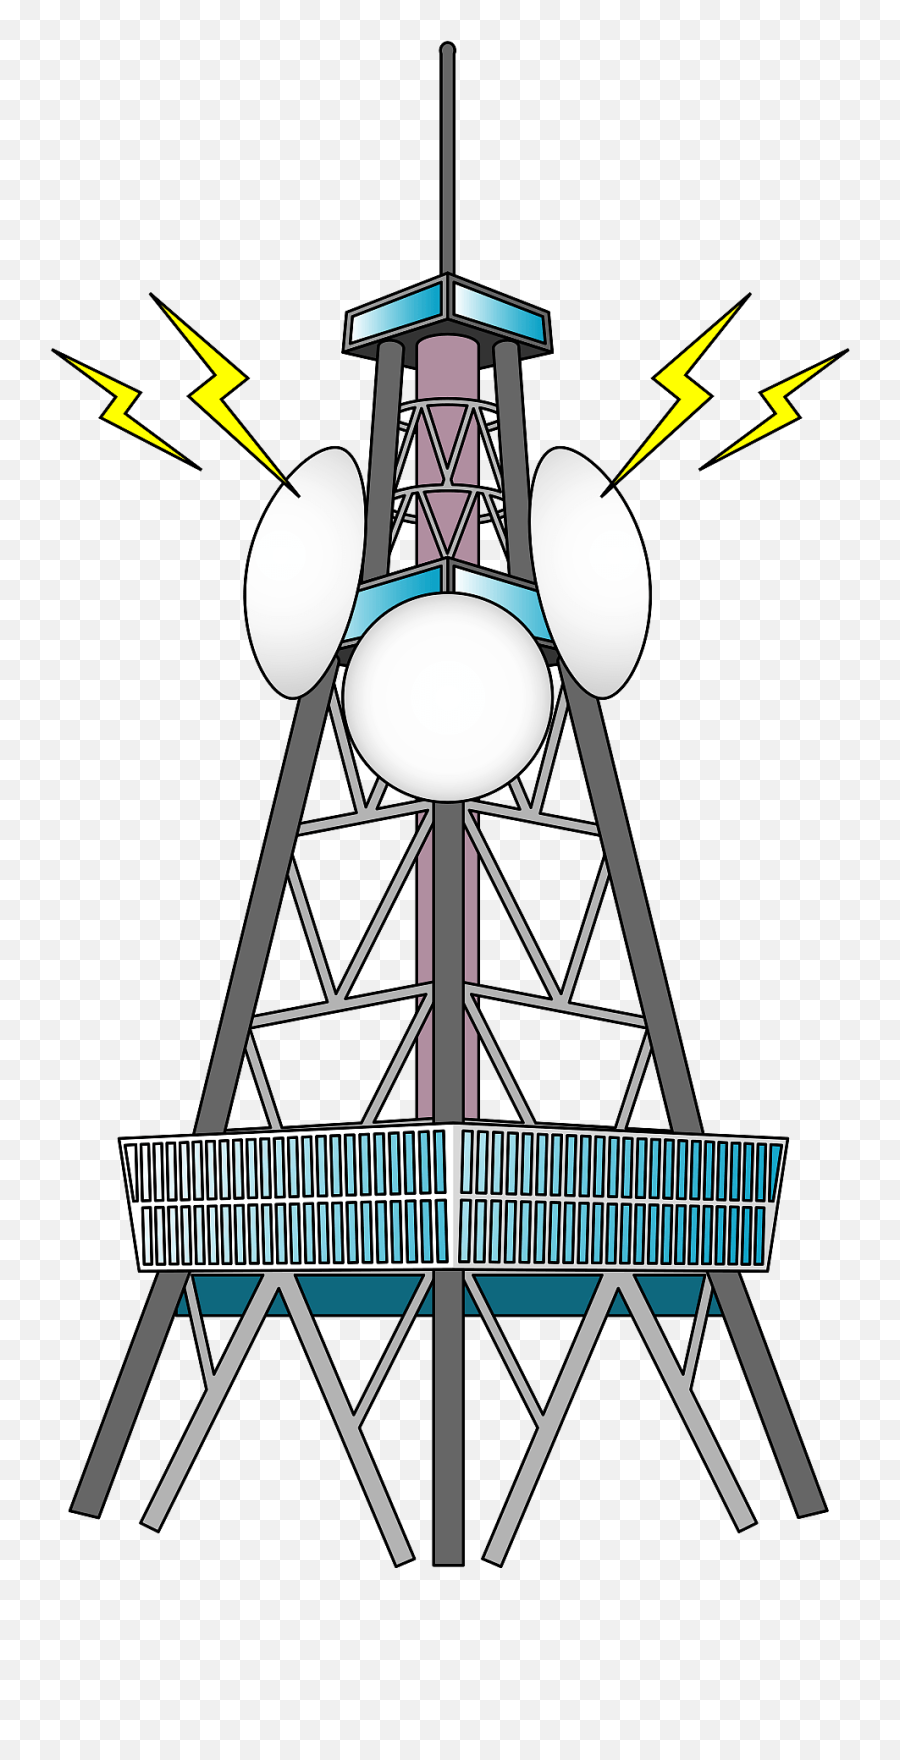 Radio Masts And Towers Clipart Free Download Transparent - Vertical Emoji,Is There An Eiffel Tower Emoji